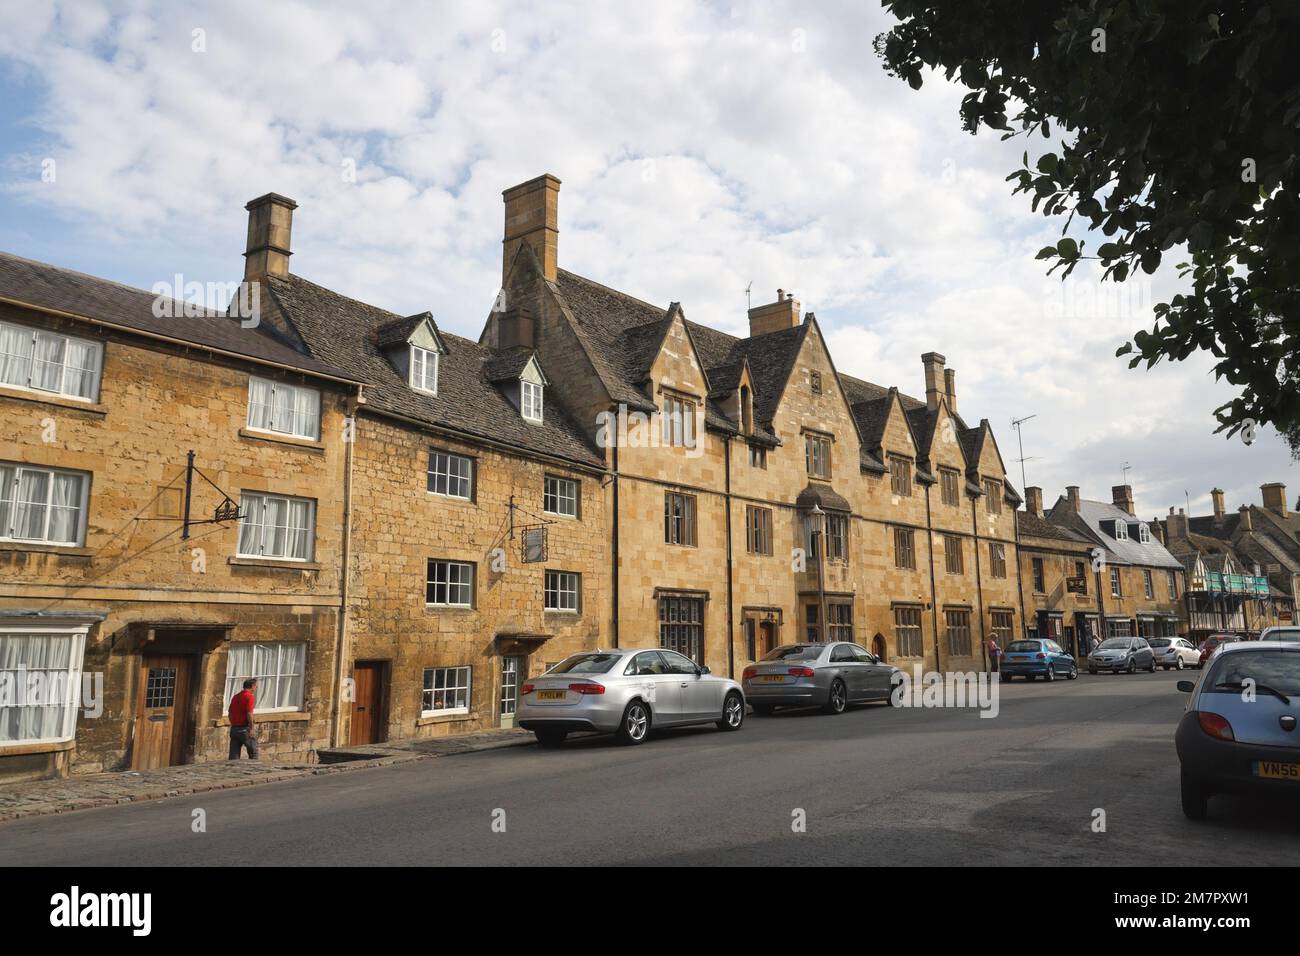 Chipping Campden High Street England, town in the English Cotswolds Stock Photo